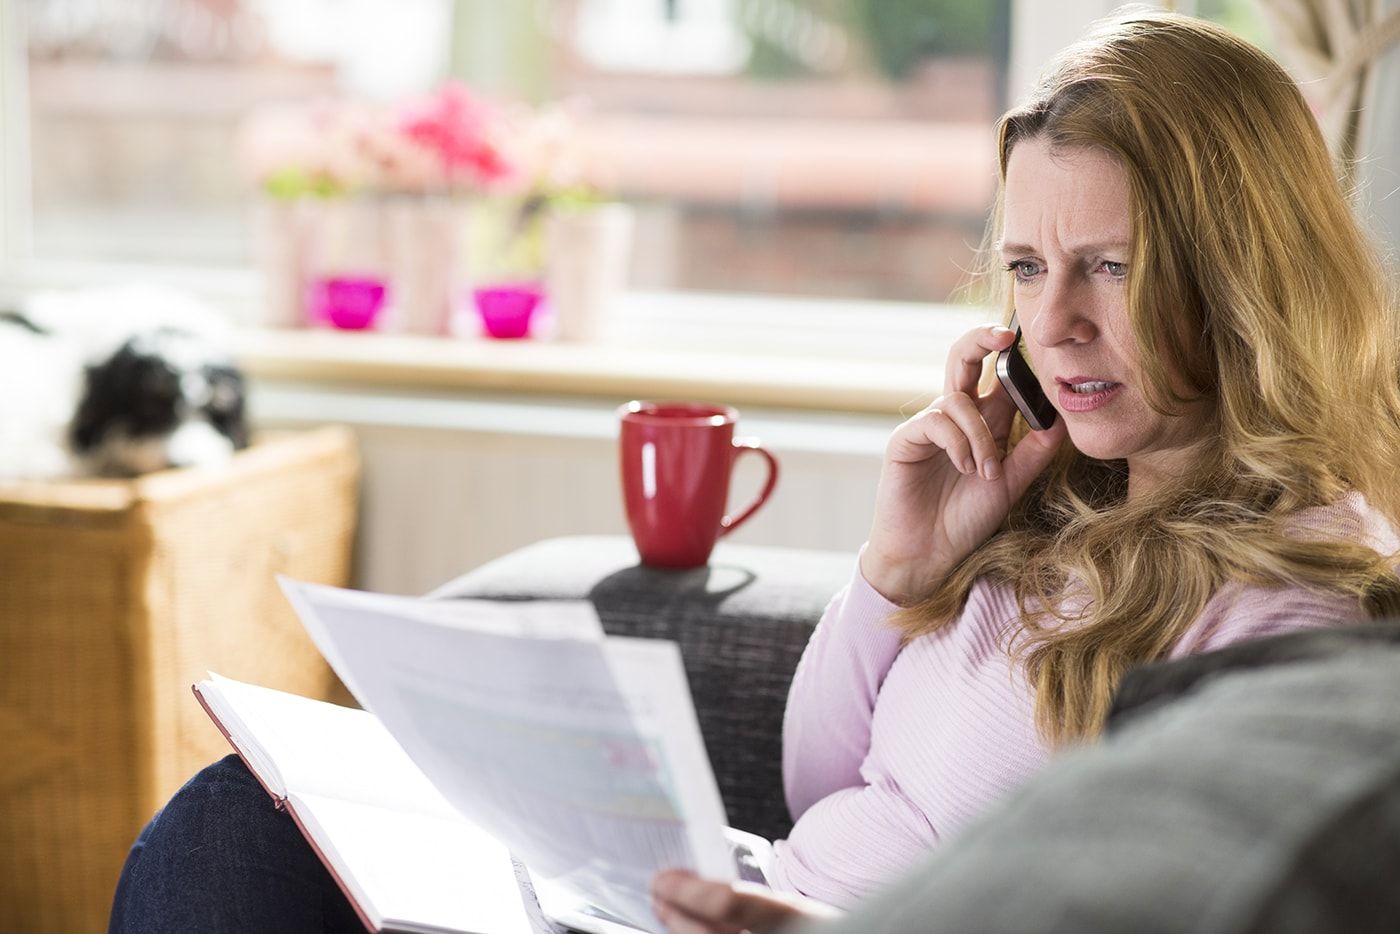 woman on the phone looking slightly concerned while holding papers